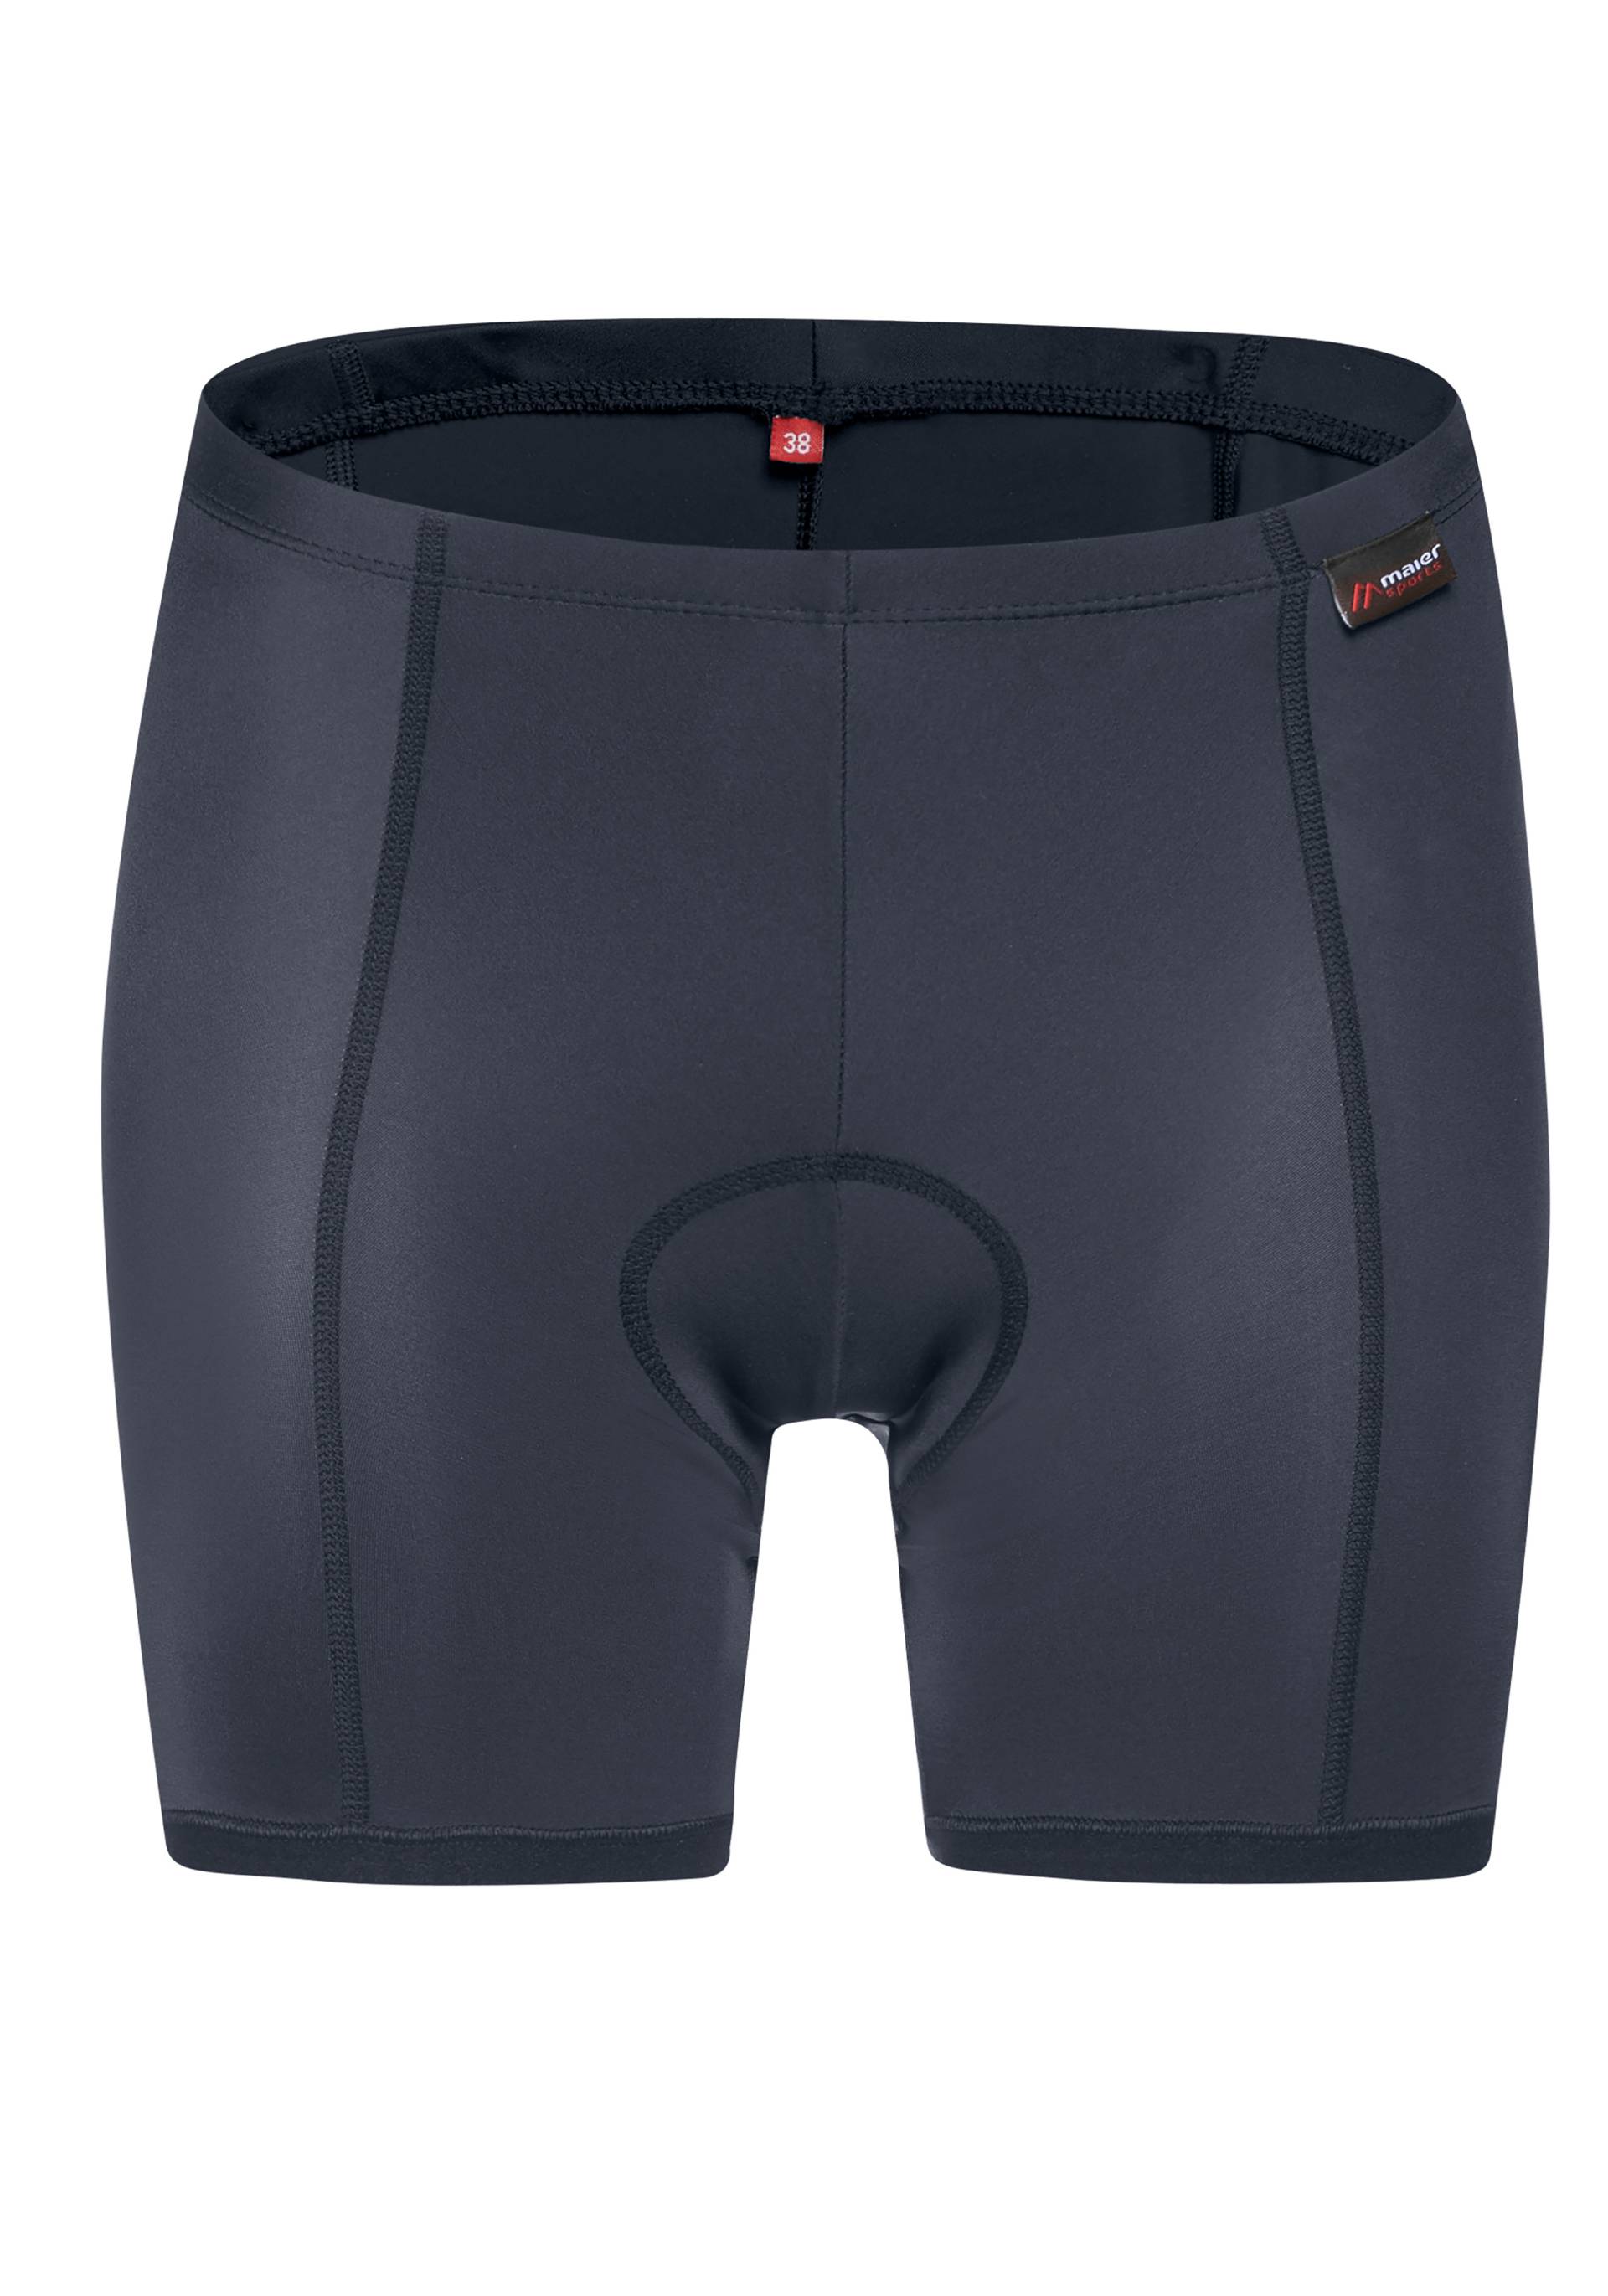 Maier Sports Fahrradhose »Cycle Panty« von maier sports